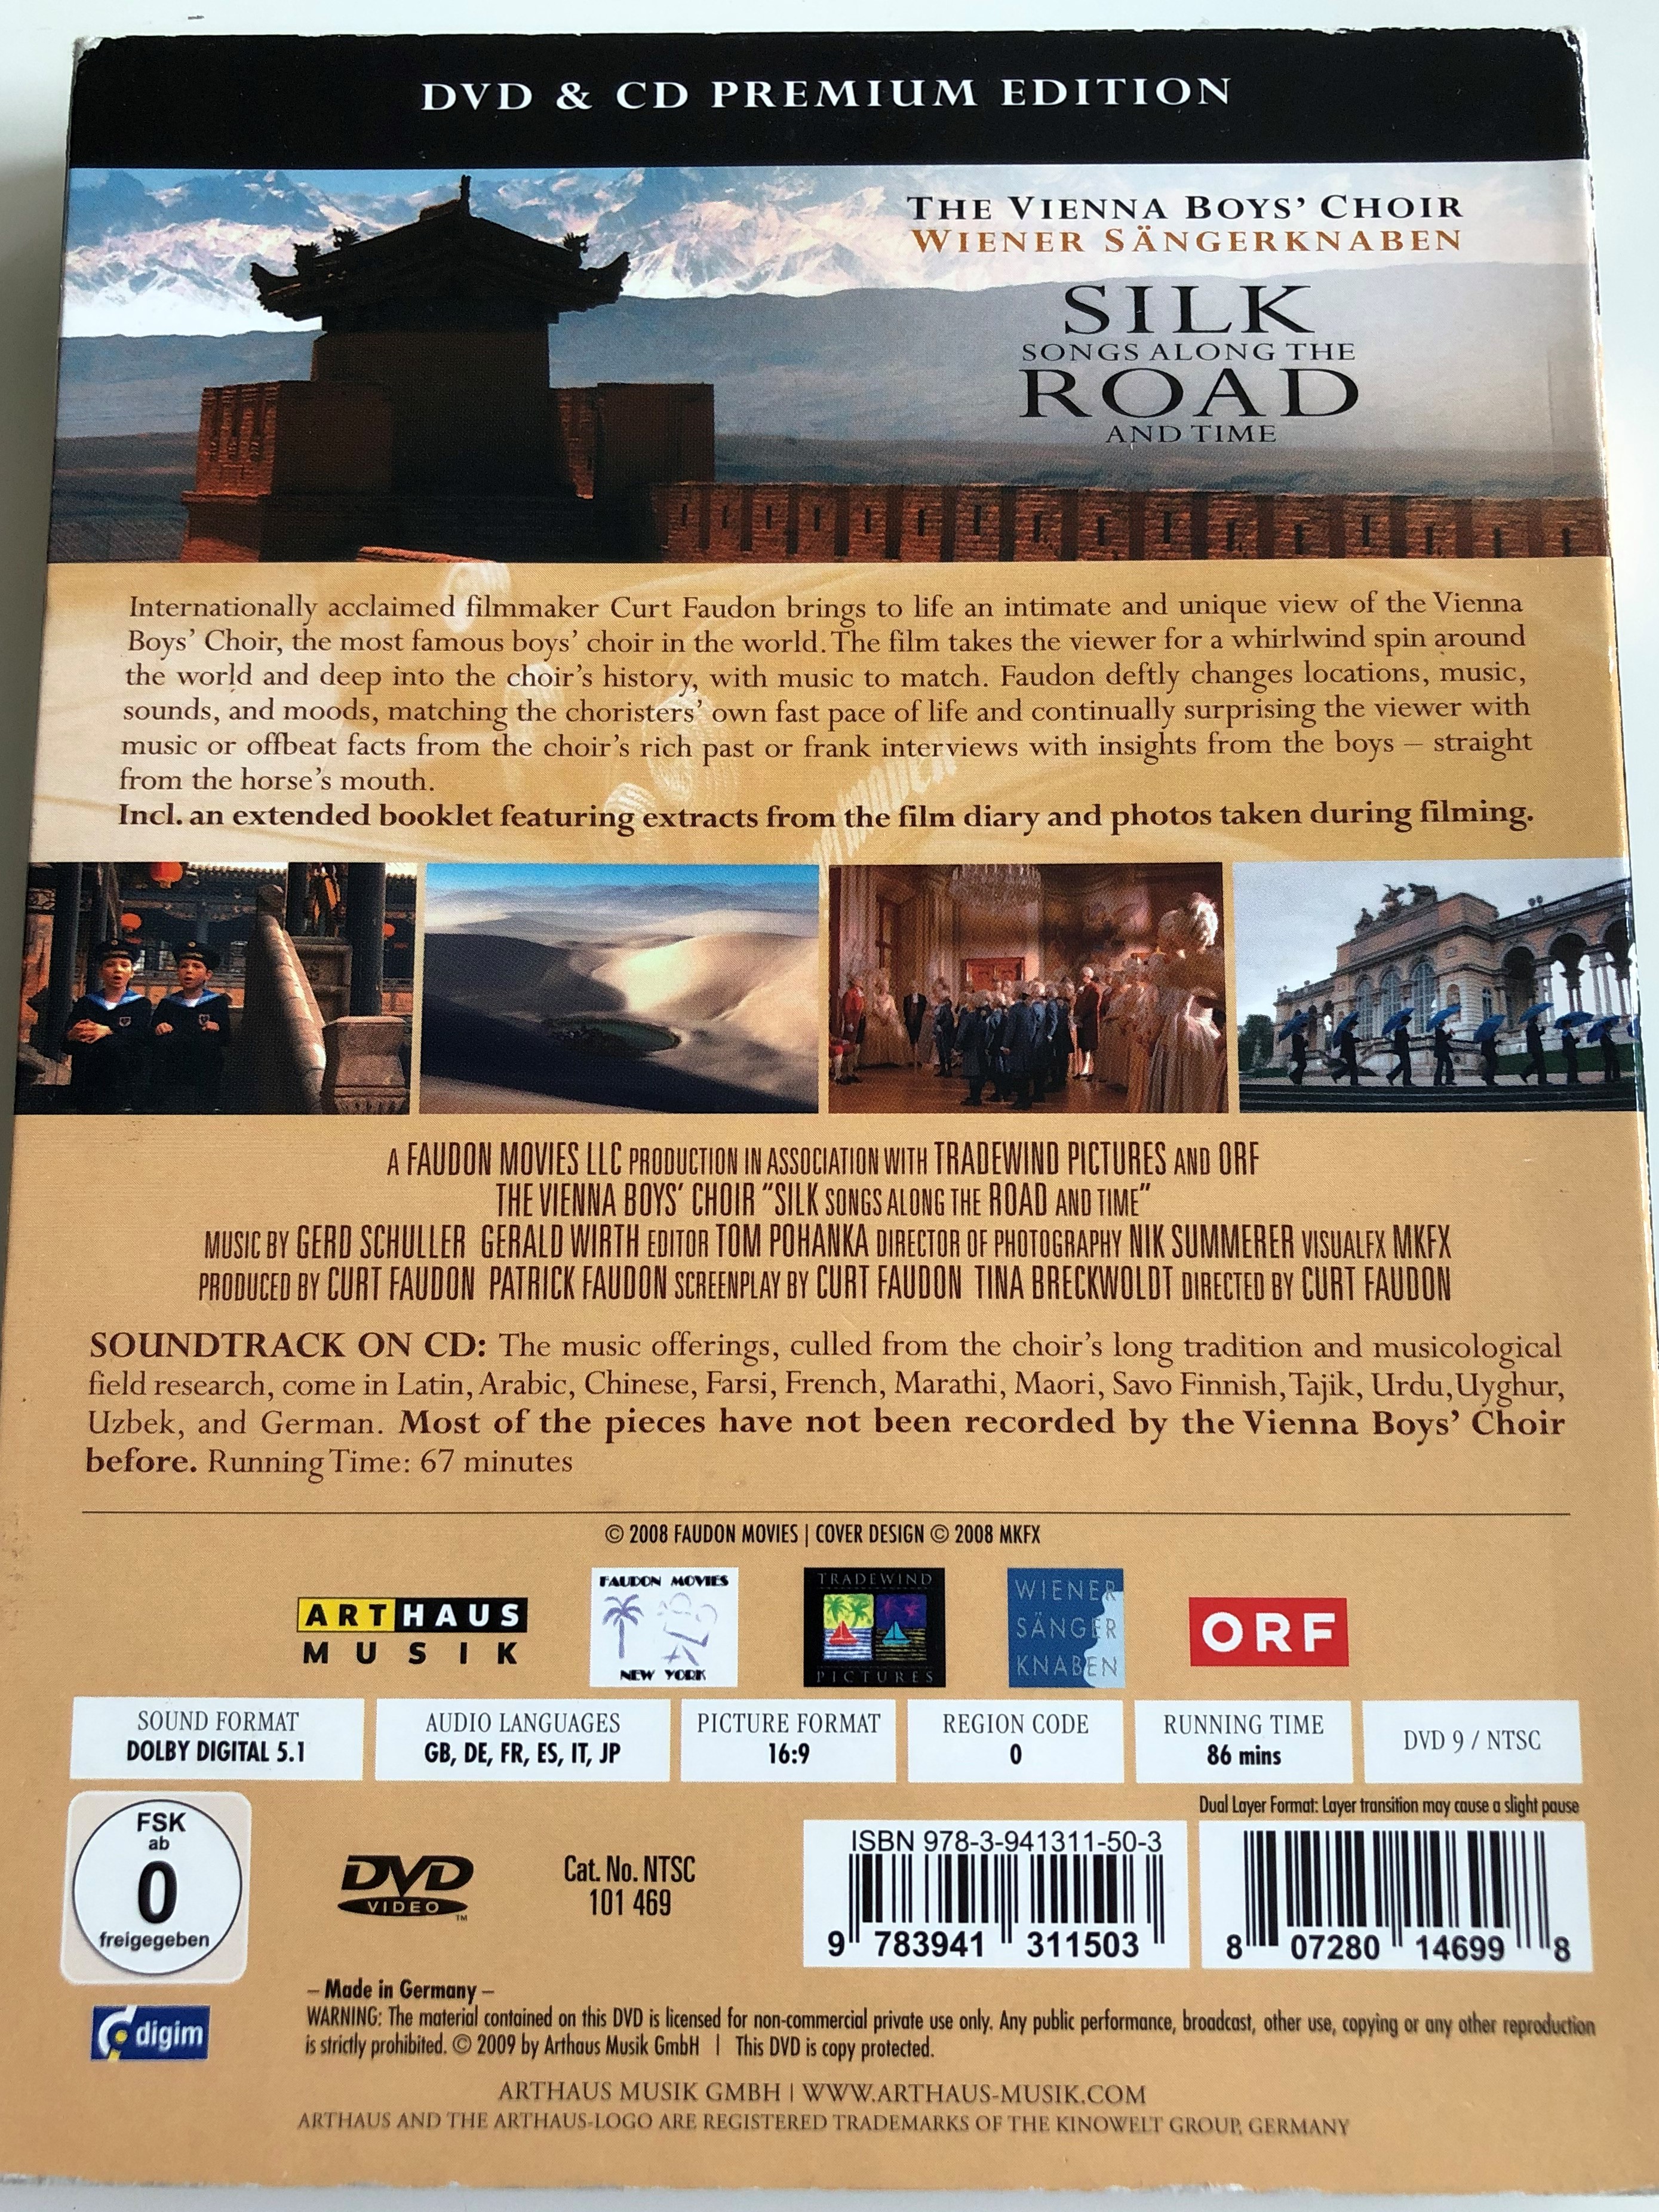 silk-road-songs-along-the-road-and-time-dvd-cd-2008-directed-bt-curt-faudon-the-vienna-boys-choir-chorus-master-janko-zannos-music-by-gerd-schuller-9-.jpg